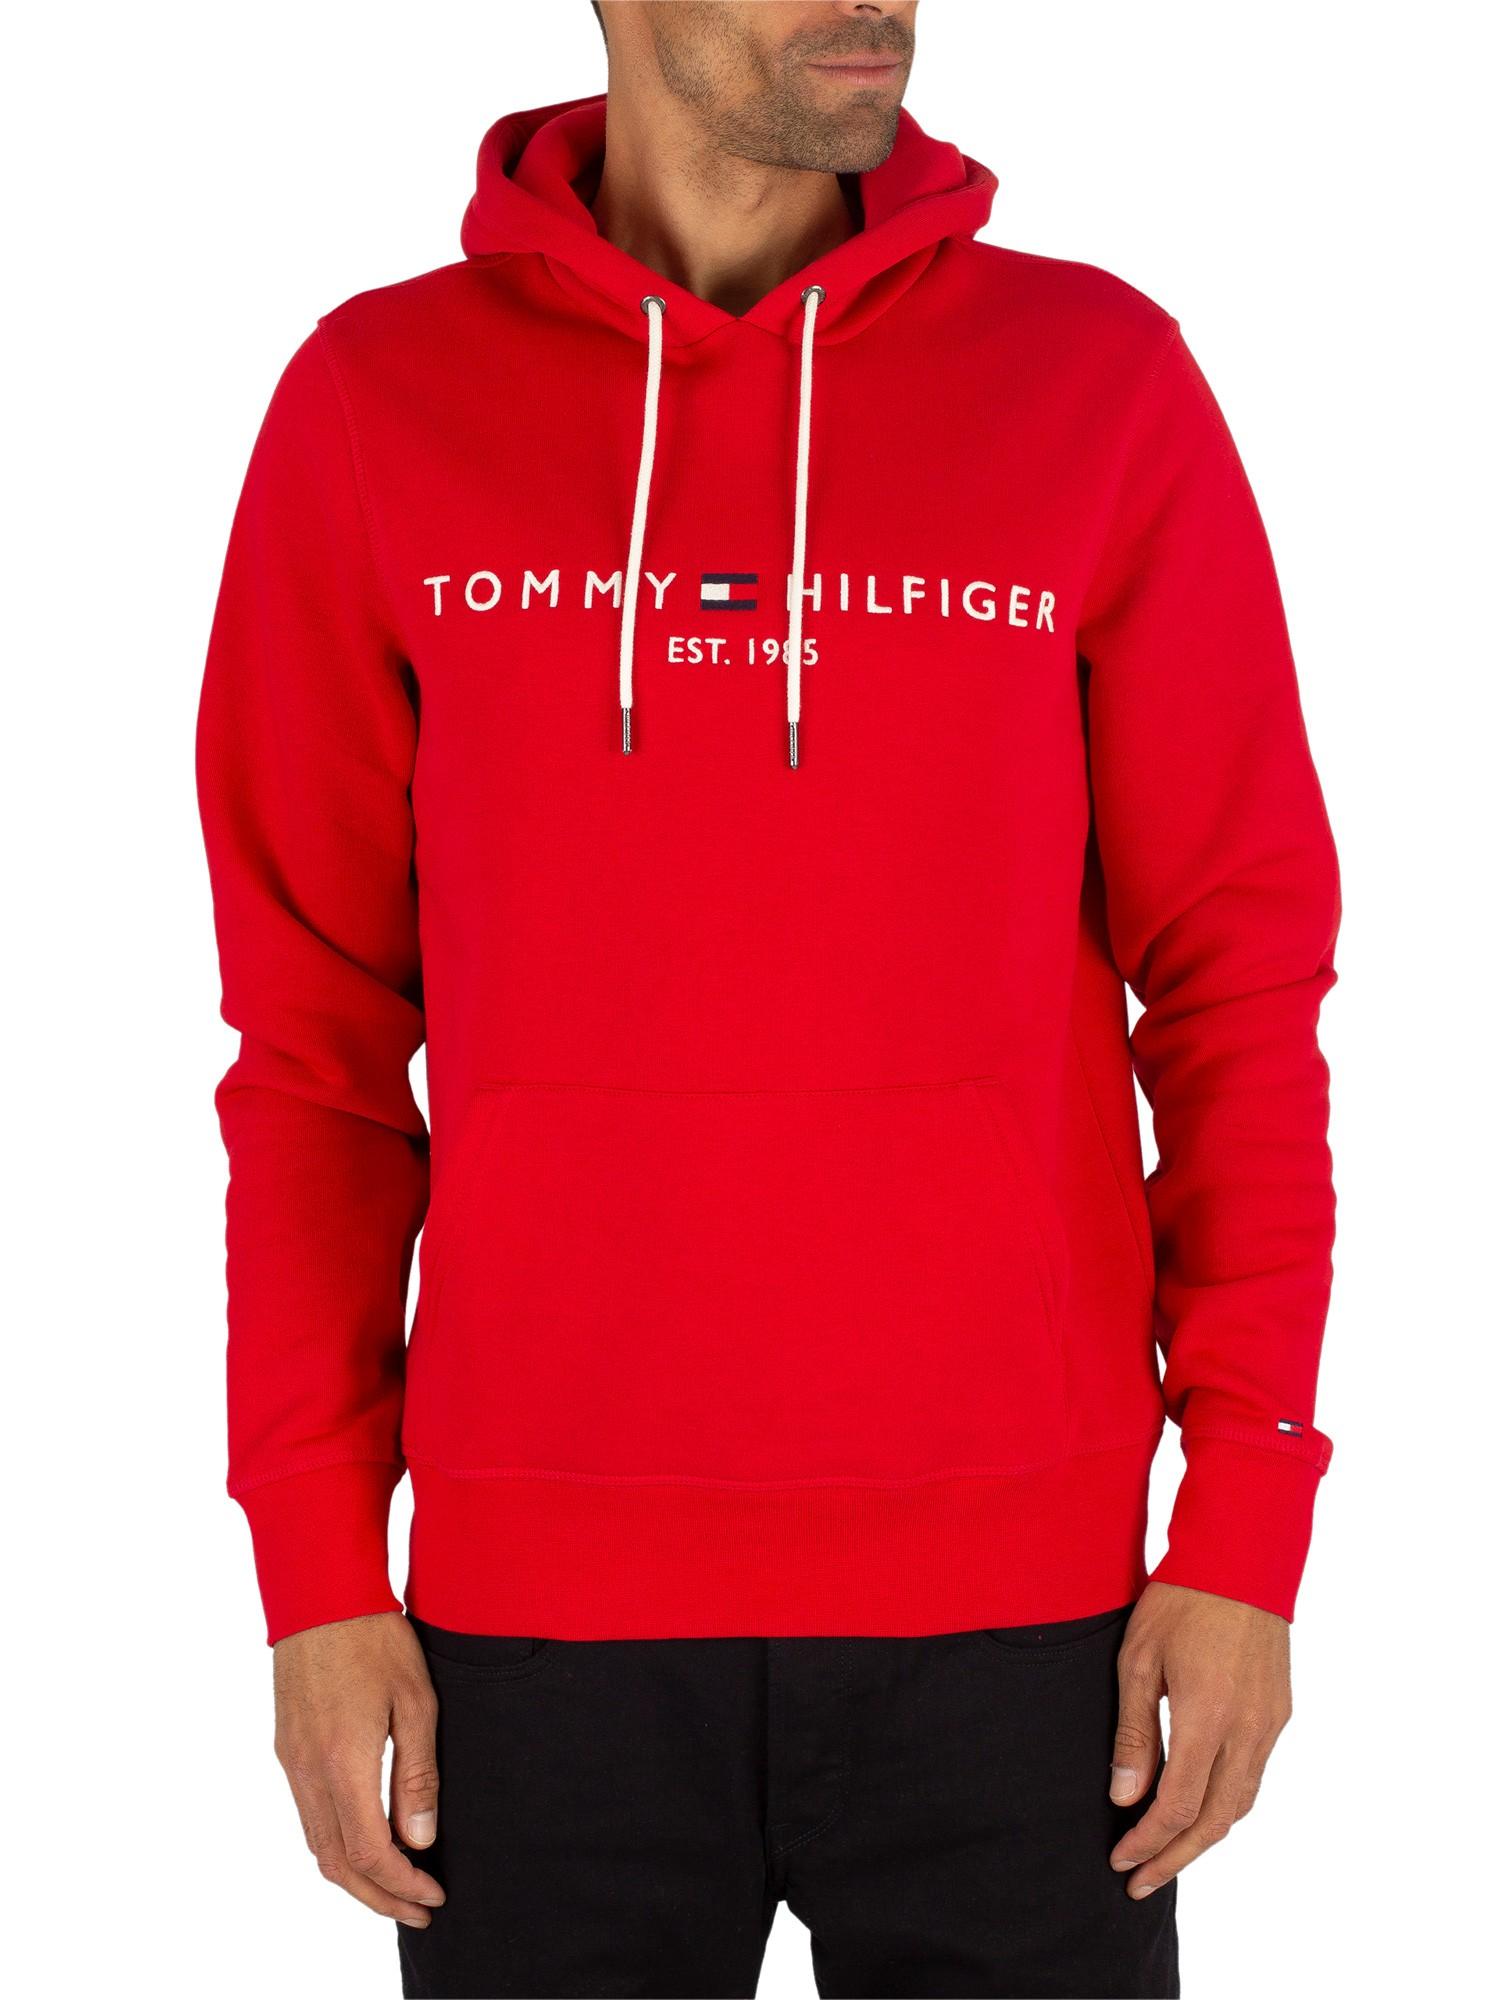 Tommy Hilfiger Red White Blue Hoodie on Sale, SAVE 57%.